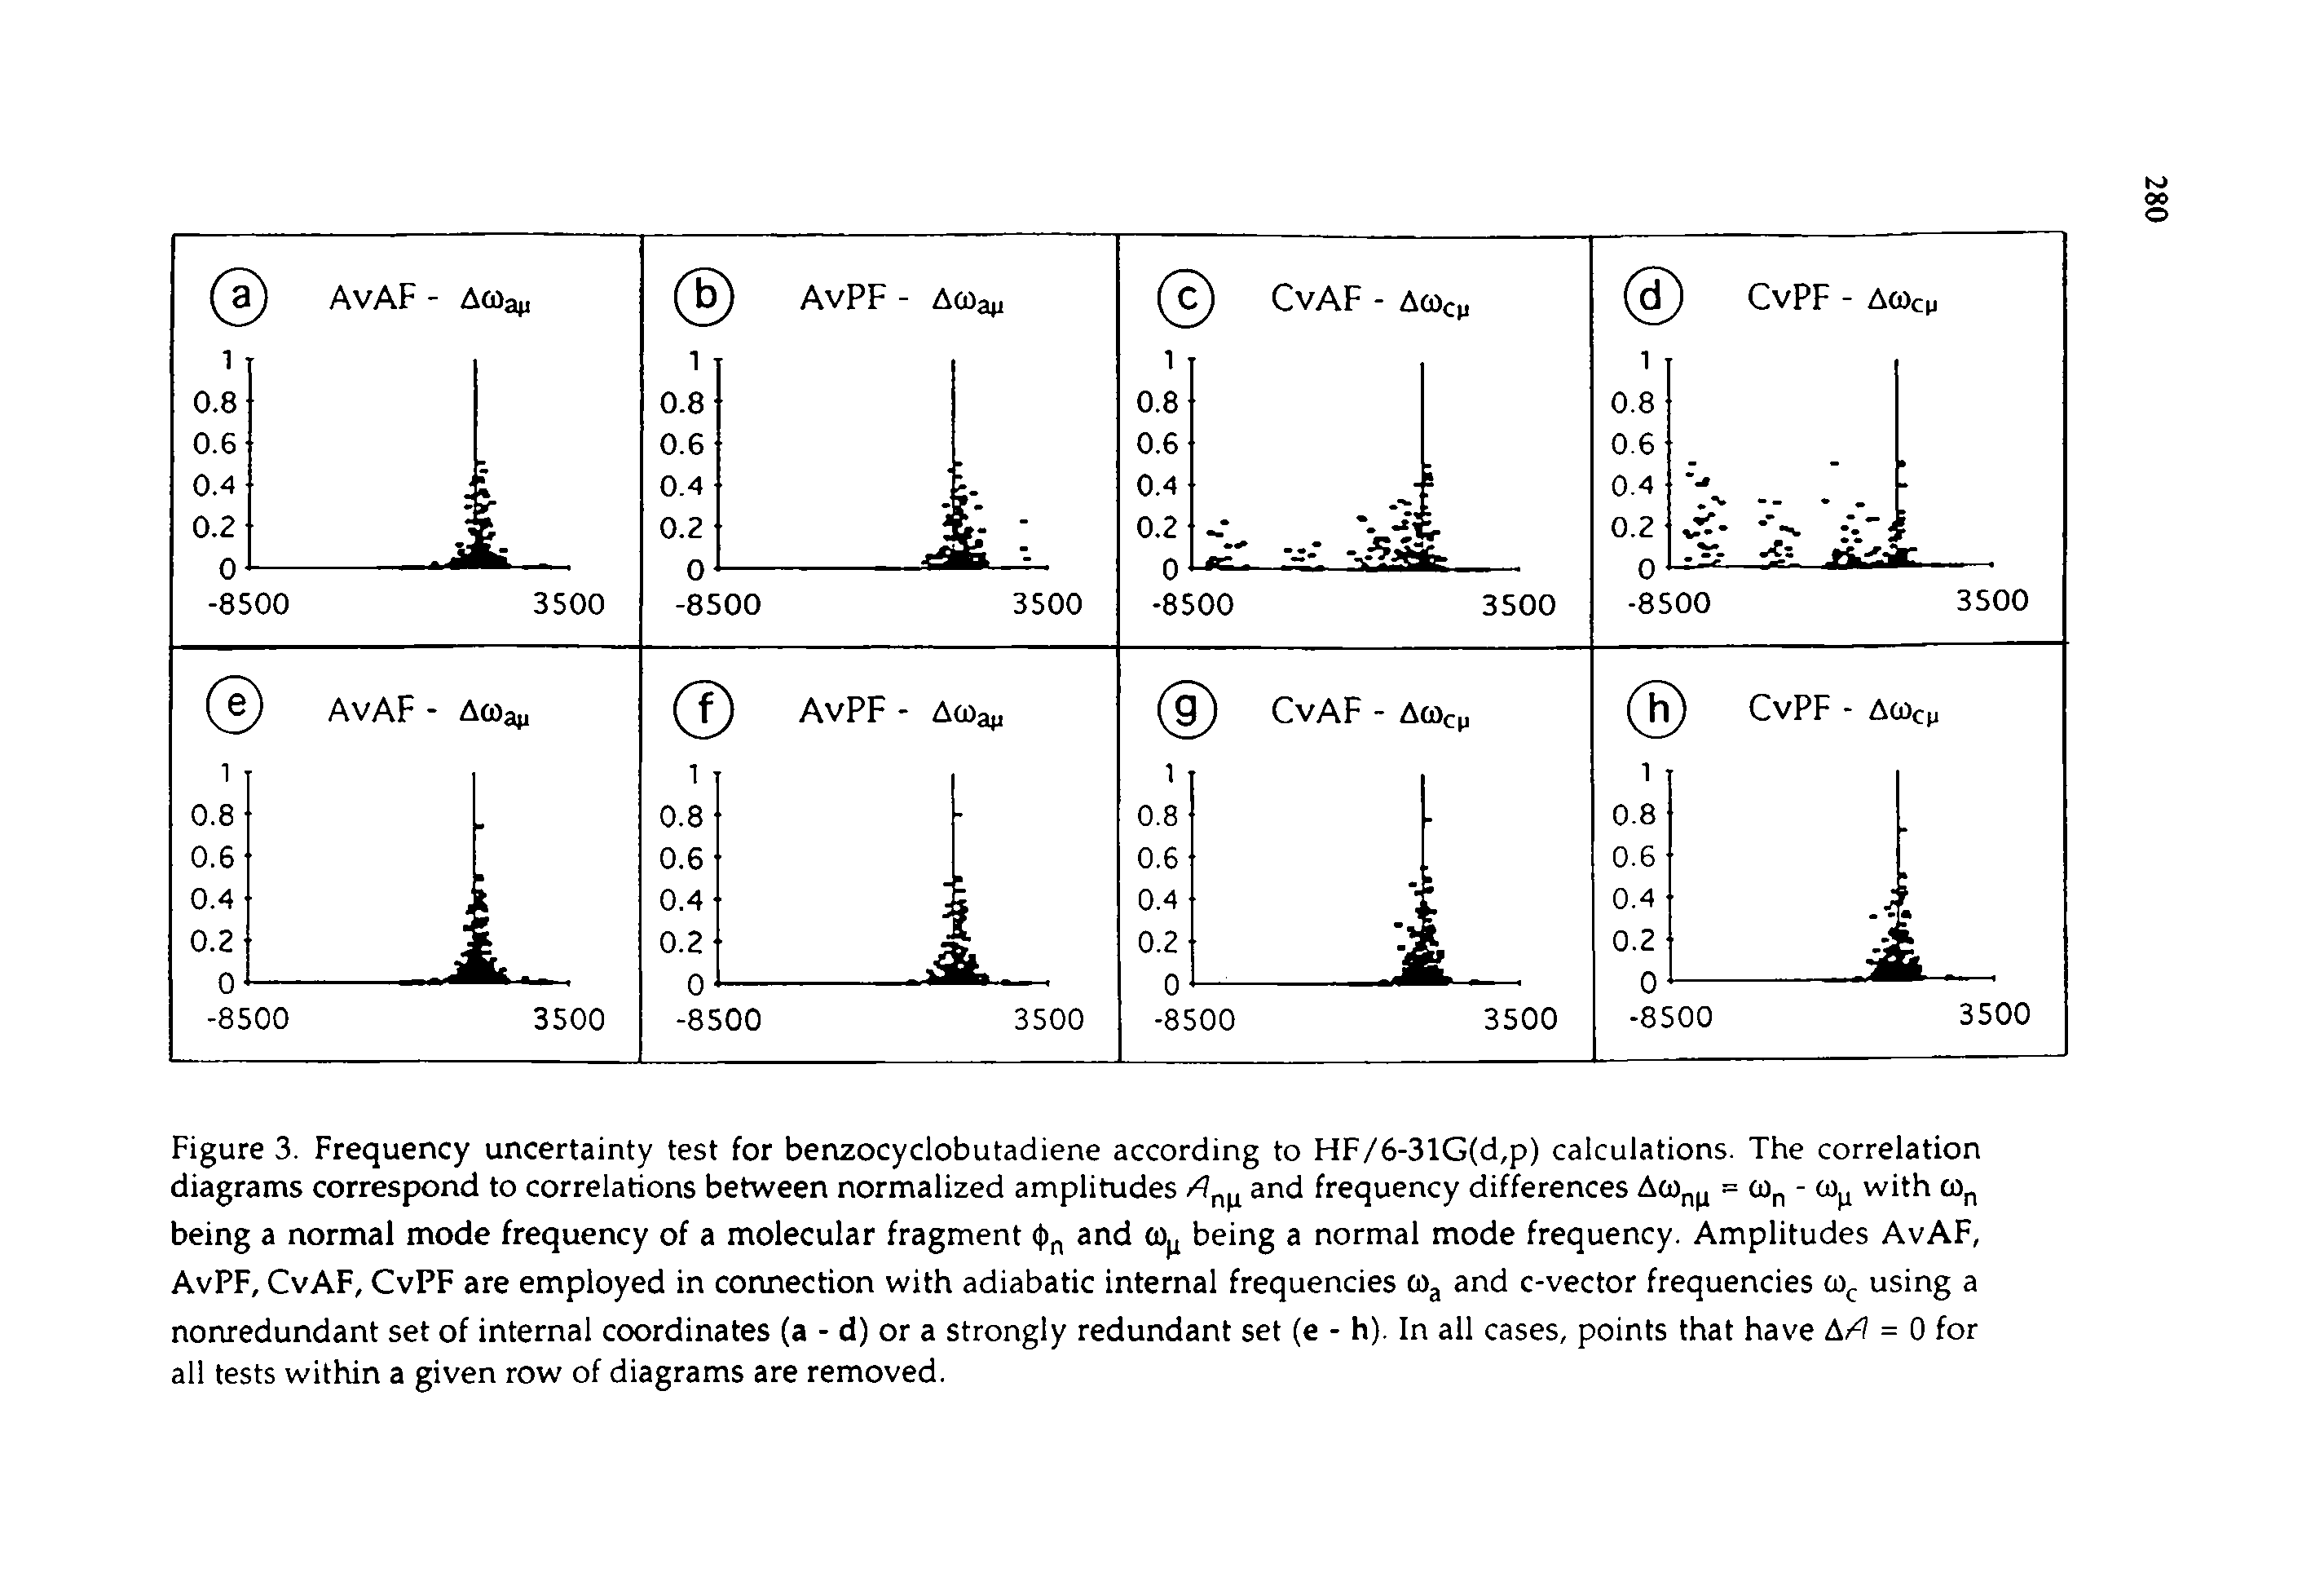 Figure 3. Frequency uncertainty test for benzocyclobutadiene according to FiF/6-31G(d,p) calculations. The correlation diagrams correspond to correlations between normalized amplitudes and frequency differences = cOp - with cOp being a normal mode frequency of a molecular fragment (t)p and 0) being a normal mode frequency. Amplitudes AvAF, AvPF, CvAF, CvPF are employed in connection with adiabatic internal frequencies CO3 and c-vector frequencies using a nonredundant set of internal coordinates (a - d) or a strongly redundant set (e - h). In all cases, points that have A/ = 0 for all tests within a given row of diagrams are removed.